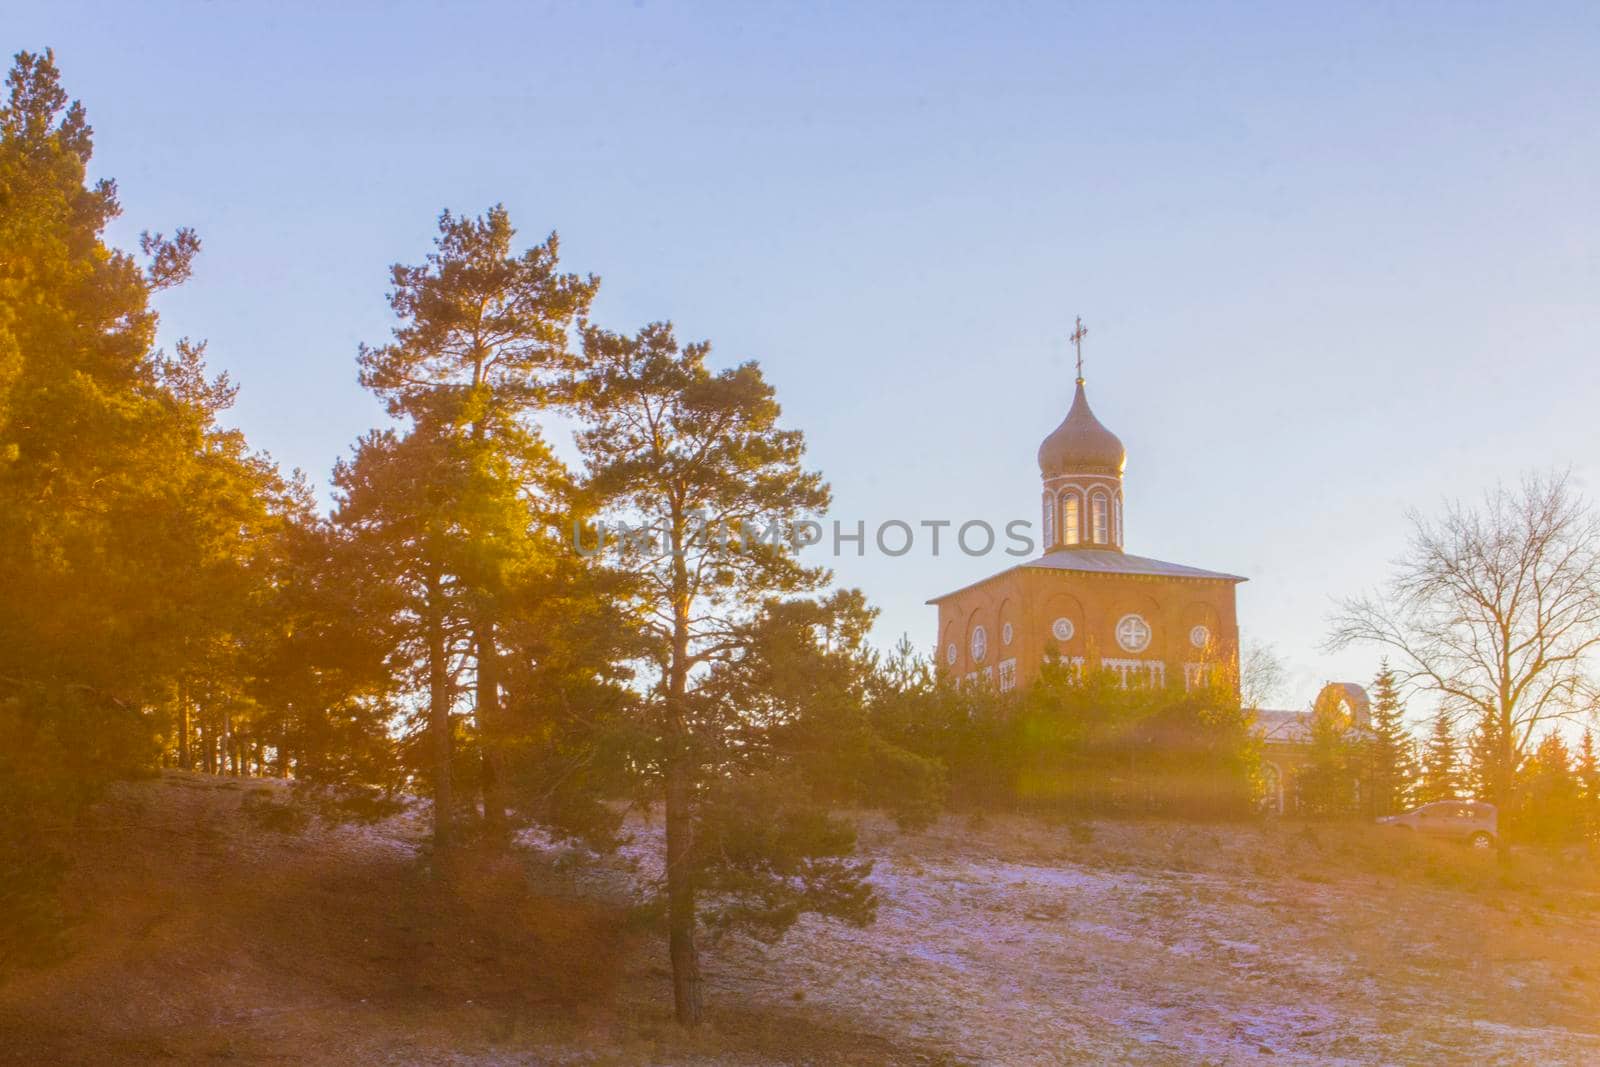 Orthodox church on a hill near the forest. Winter sunset landscape with clear blue sky.